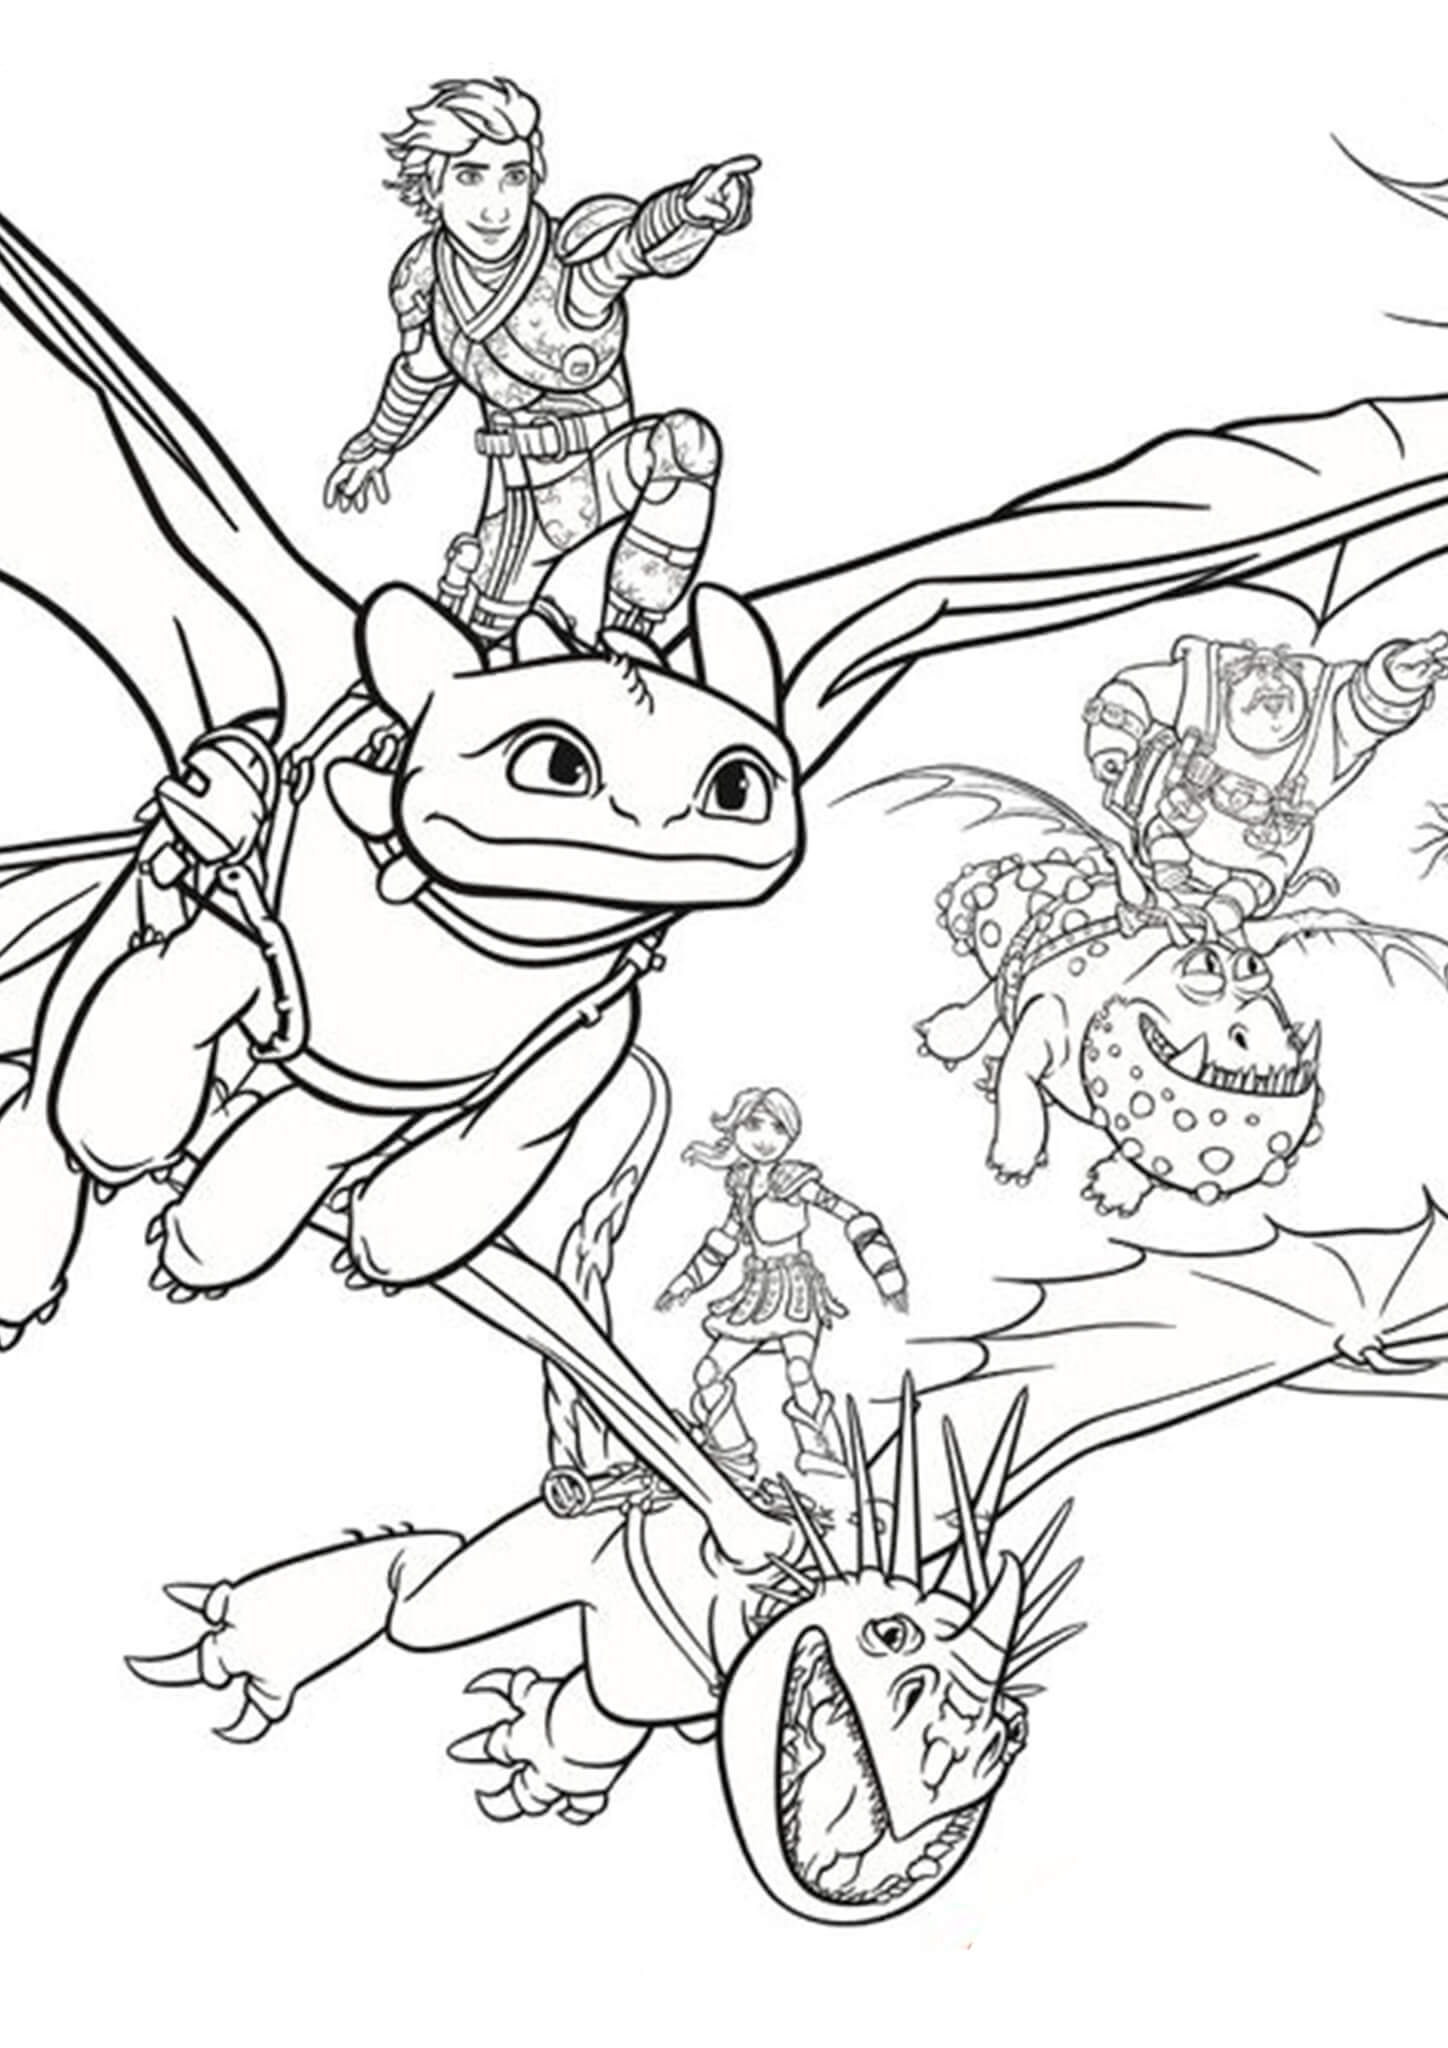 How To Train Your Dragon Coloring Page Toothless